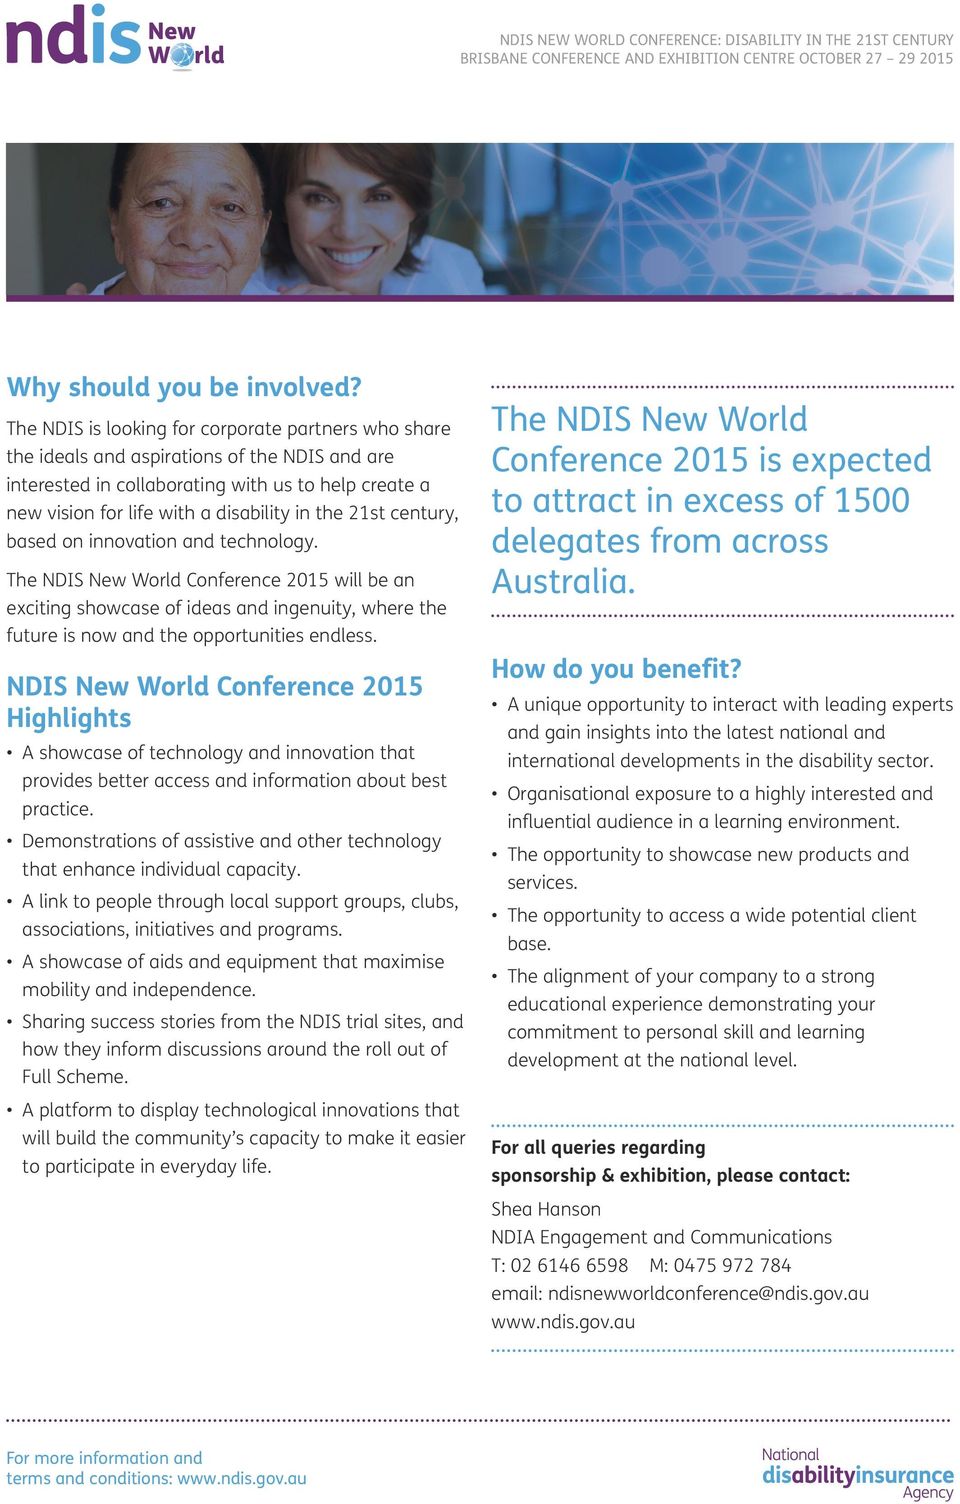 21st century, based on innovation and technology. The NDIS New World Conference 2015 will be an exciting showcase of ideas and ingenuity, where the future is now and the opportunities endless.